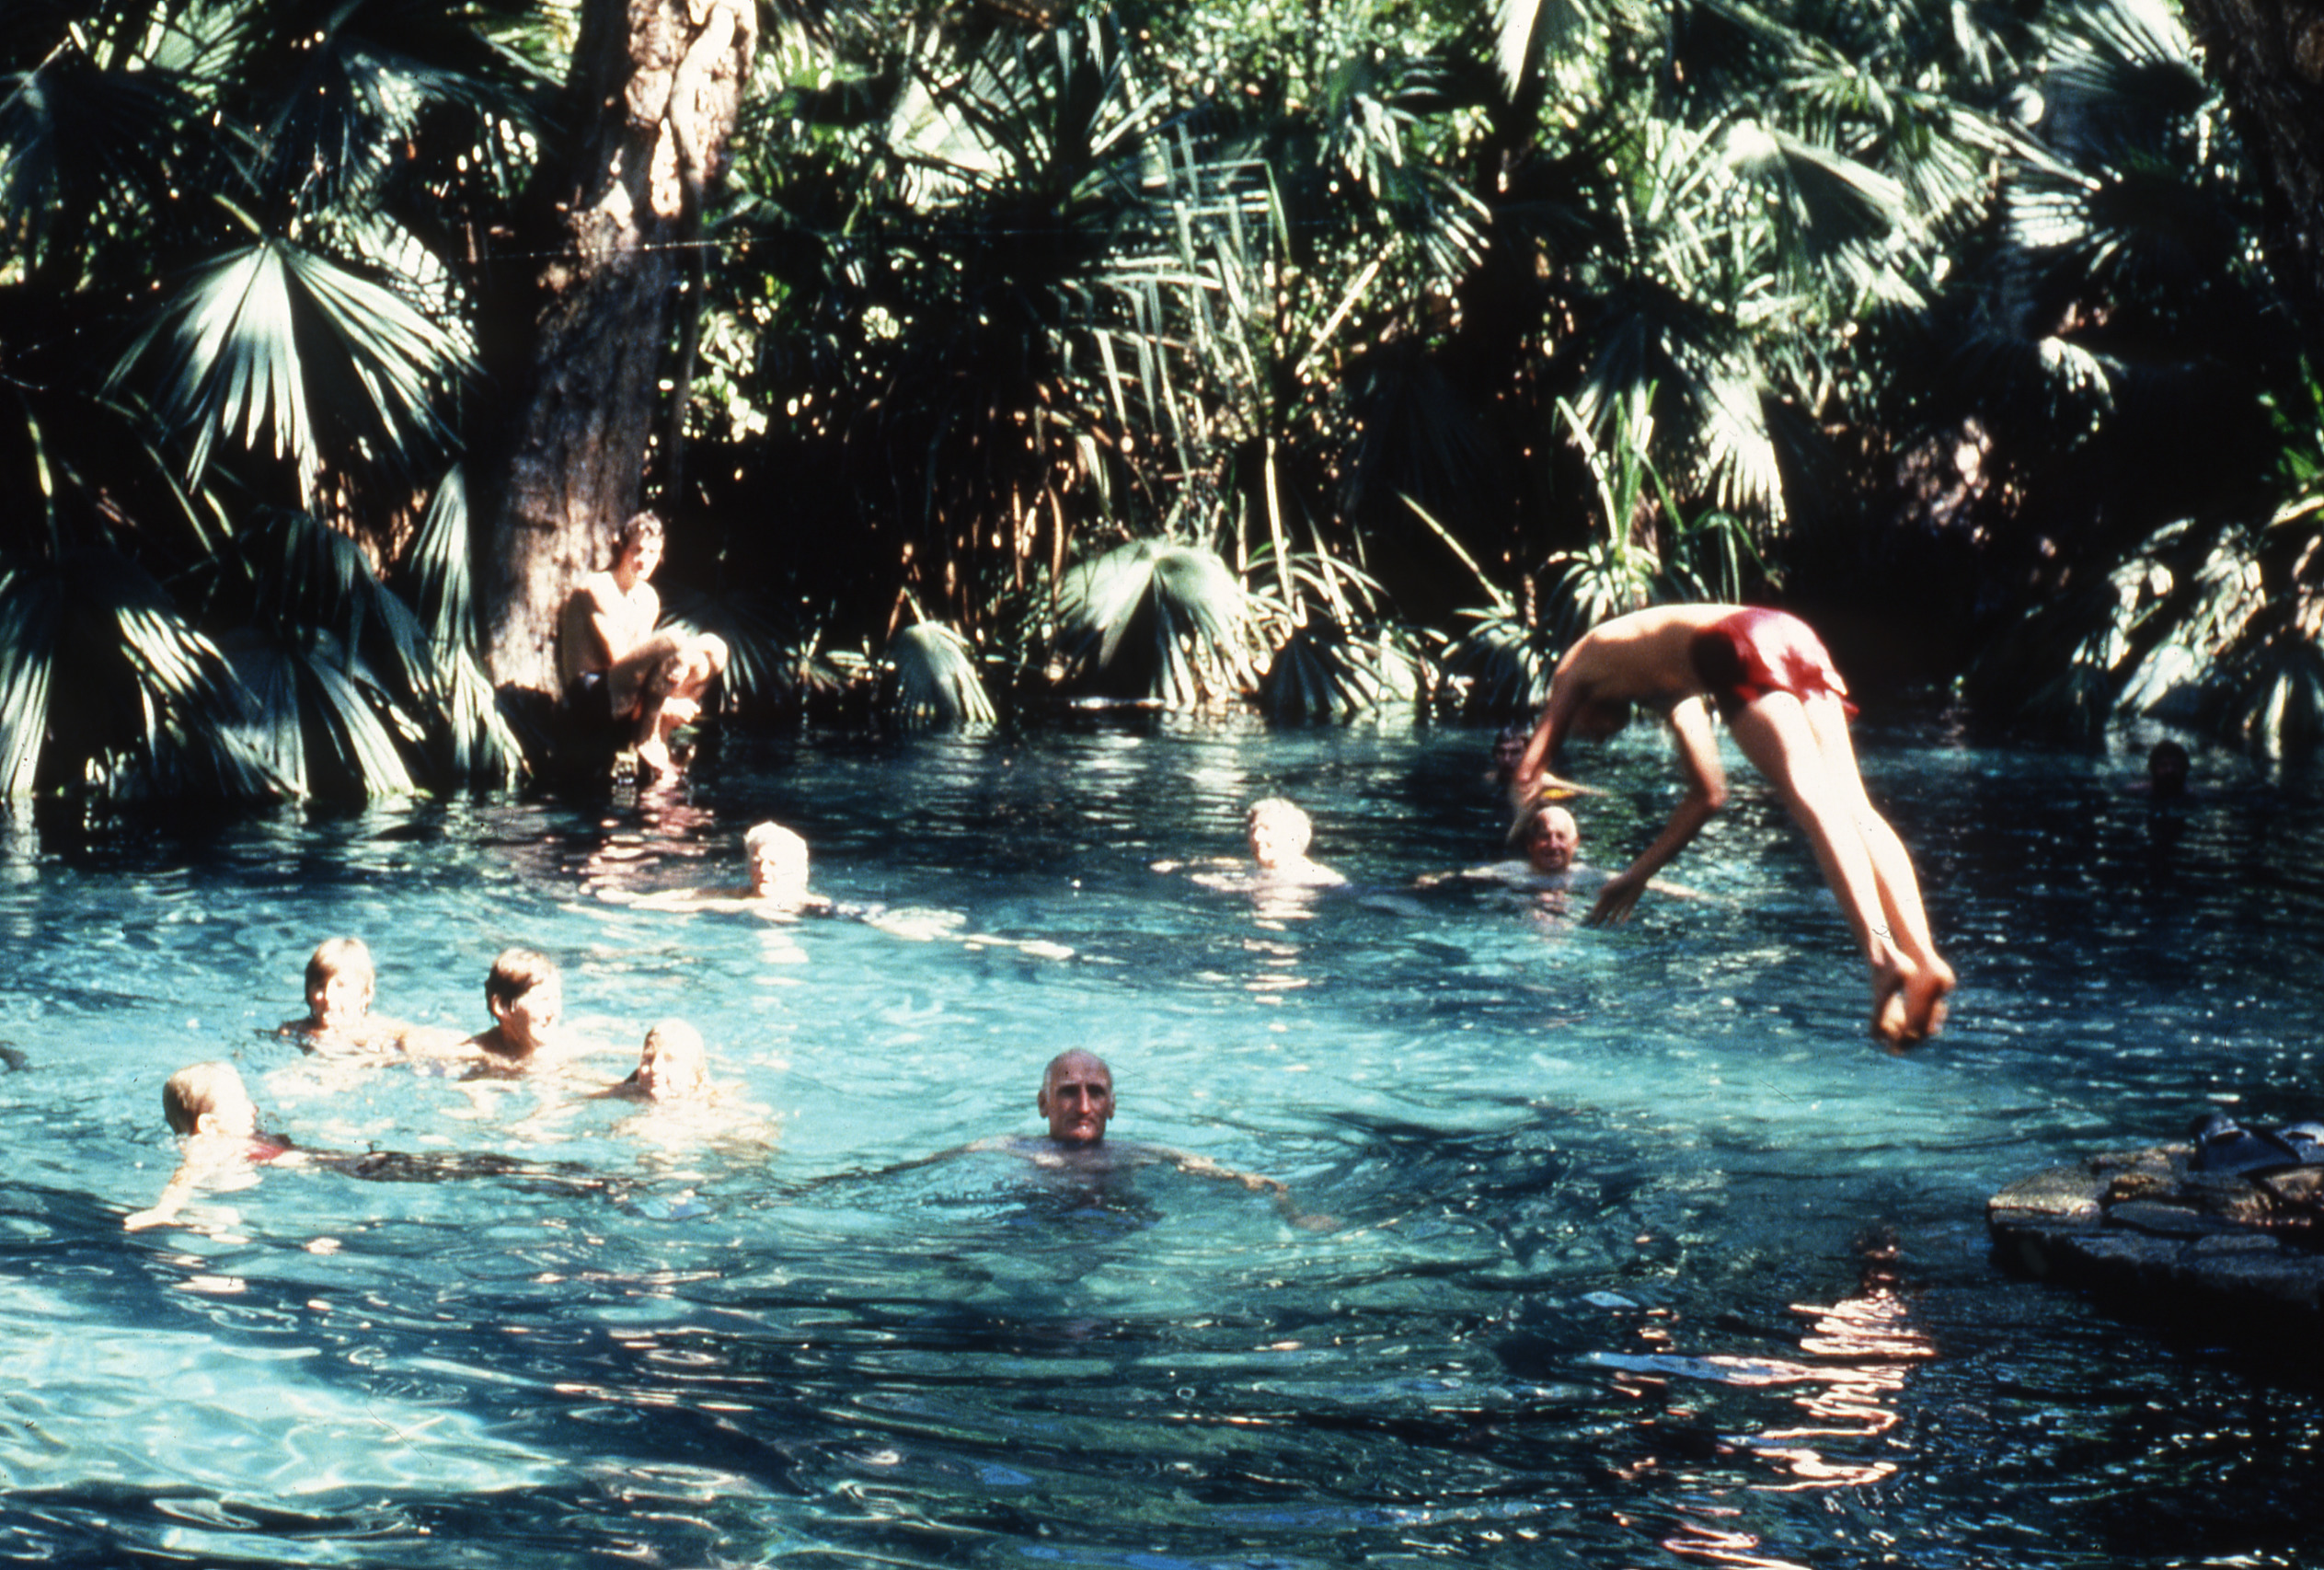 People swimming and diving into in a clear blue water hole surrounded by palms and tropical foliage 